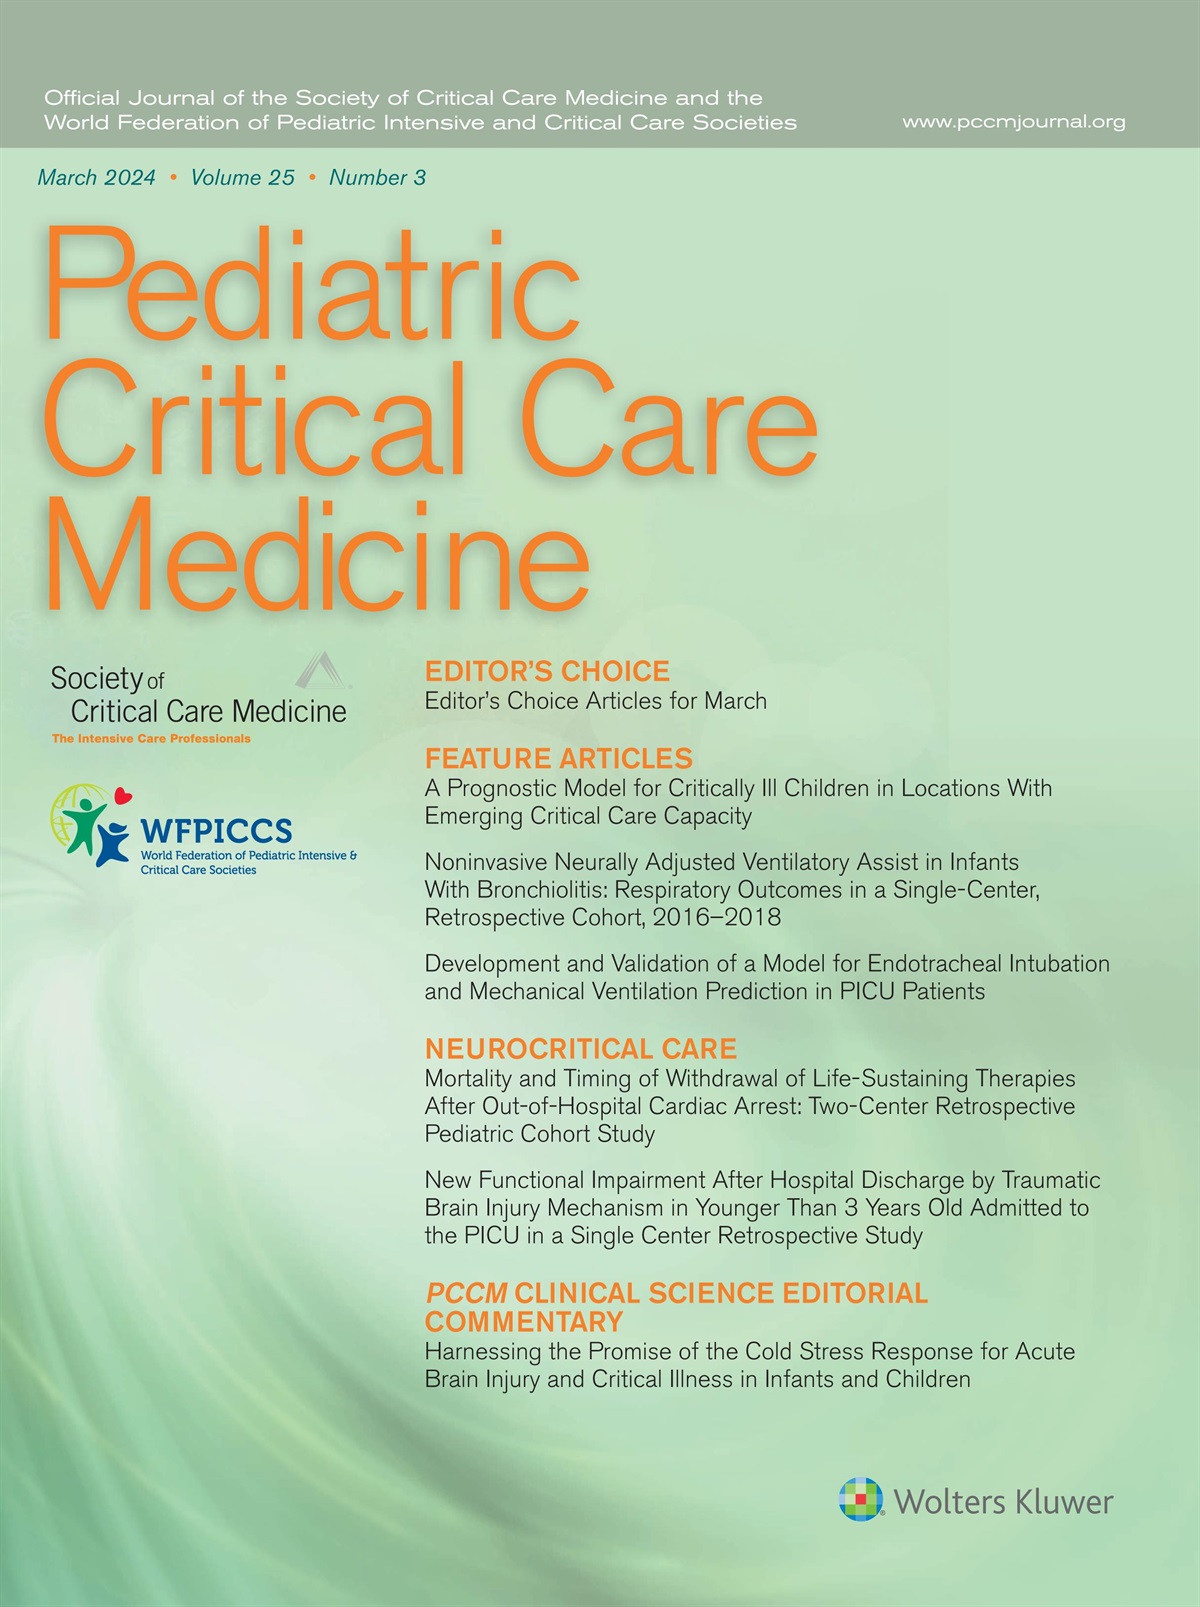 Definition, Incidence, and Epidemiology of Pediatric Acute Respiratory Distress Syndrome: From the Second Pediatric Acute Lung Injury Consensus Conference: Erratum